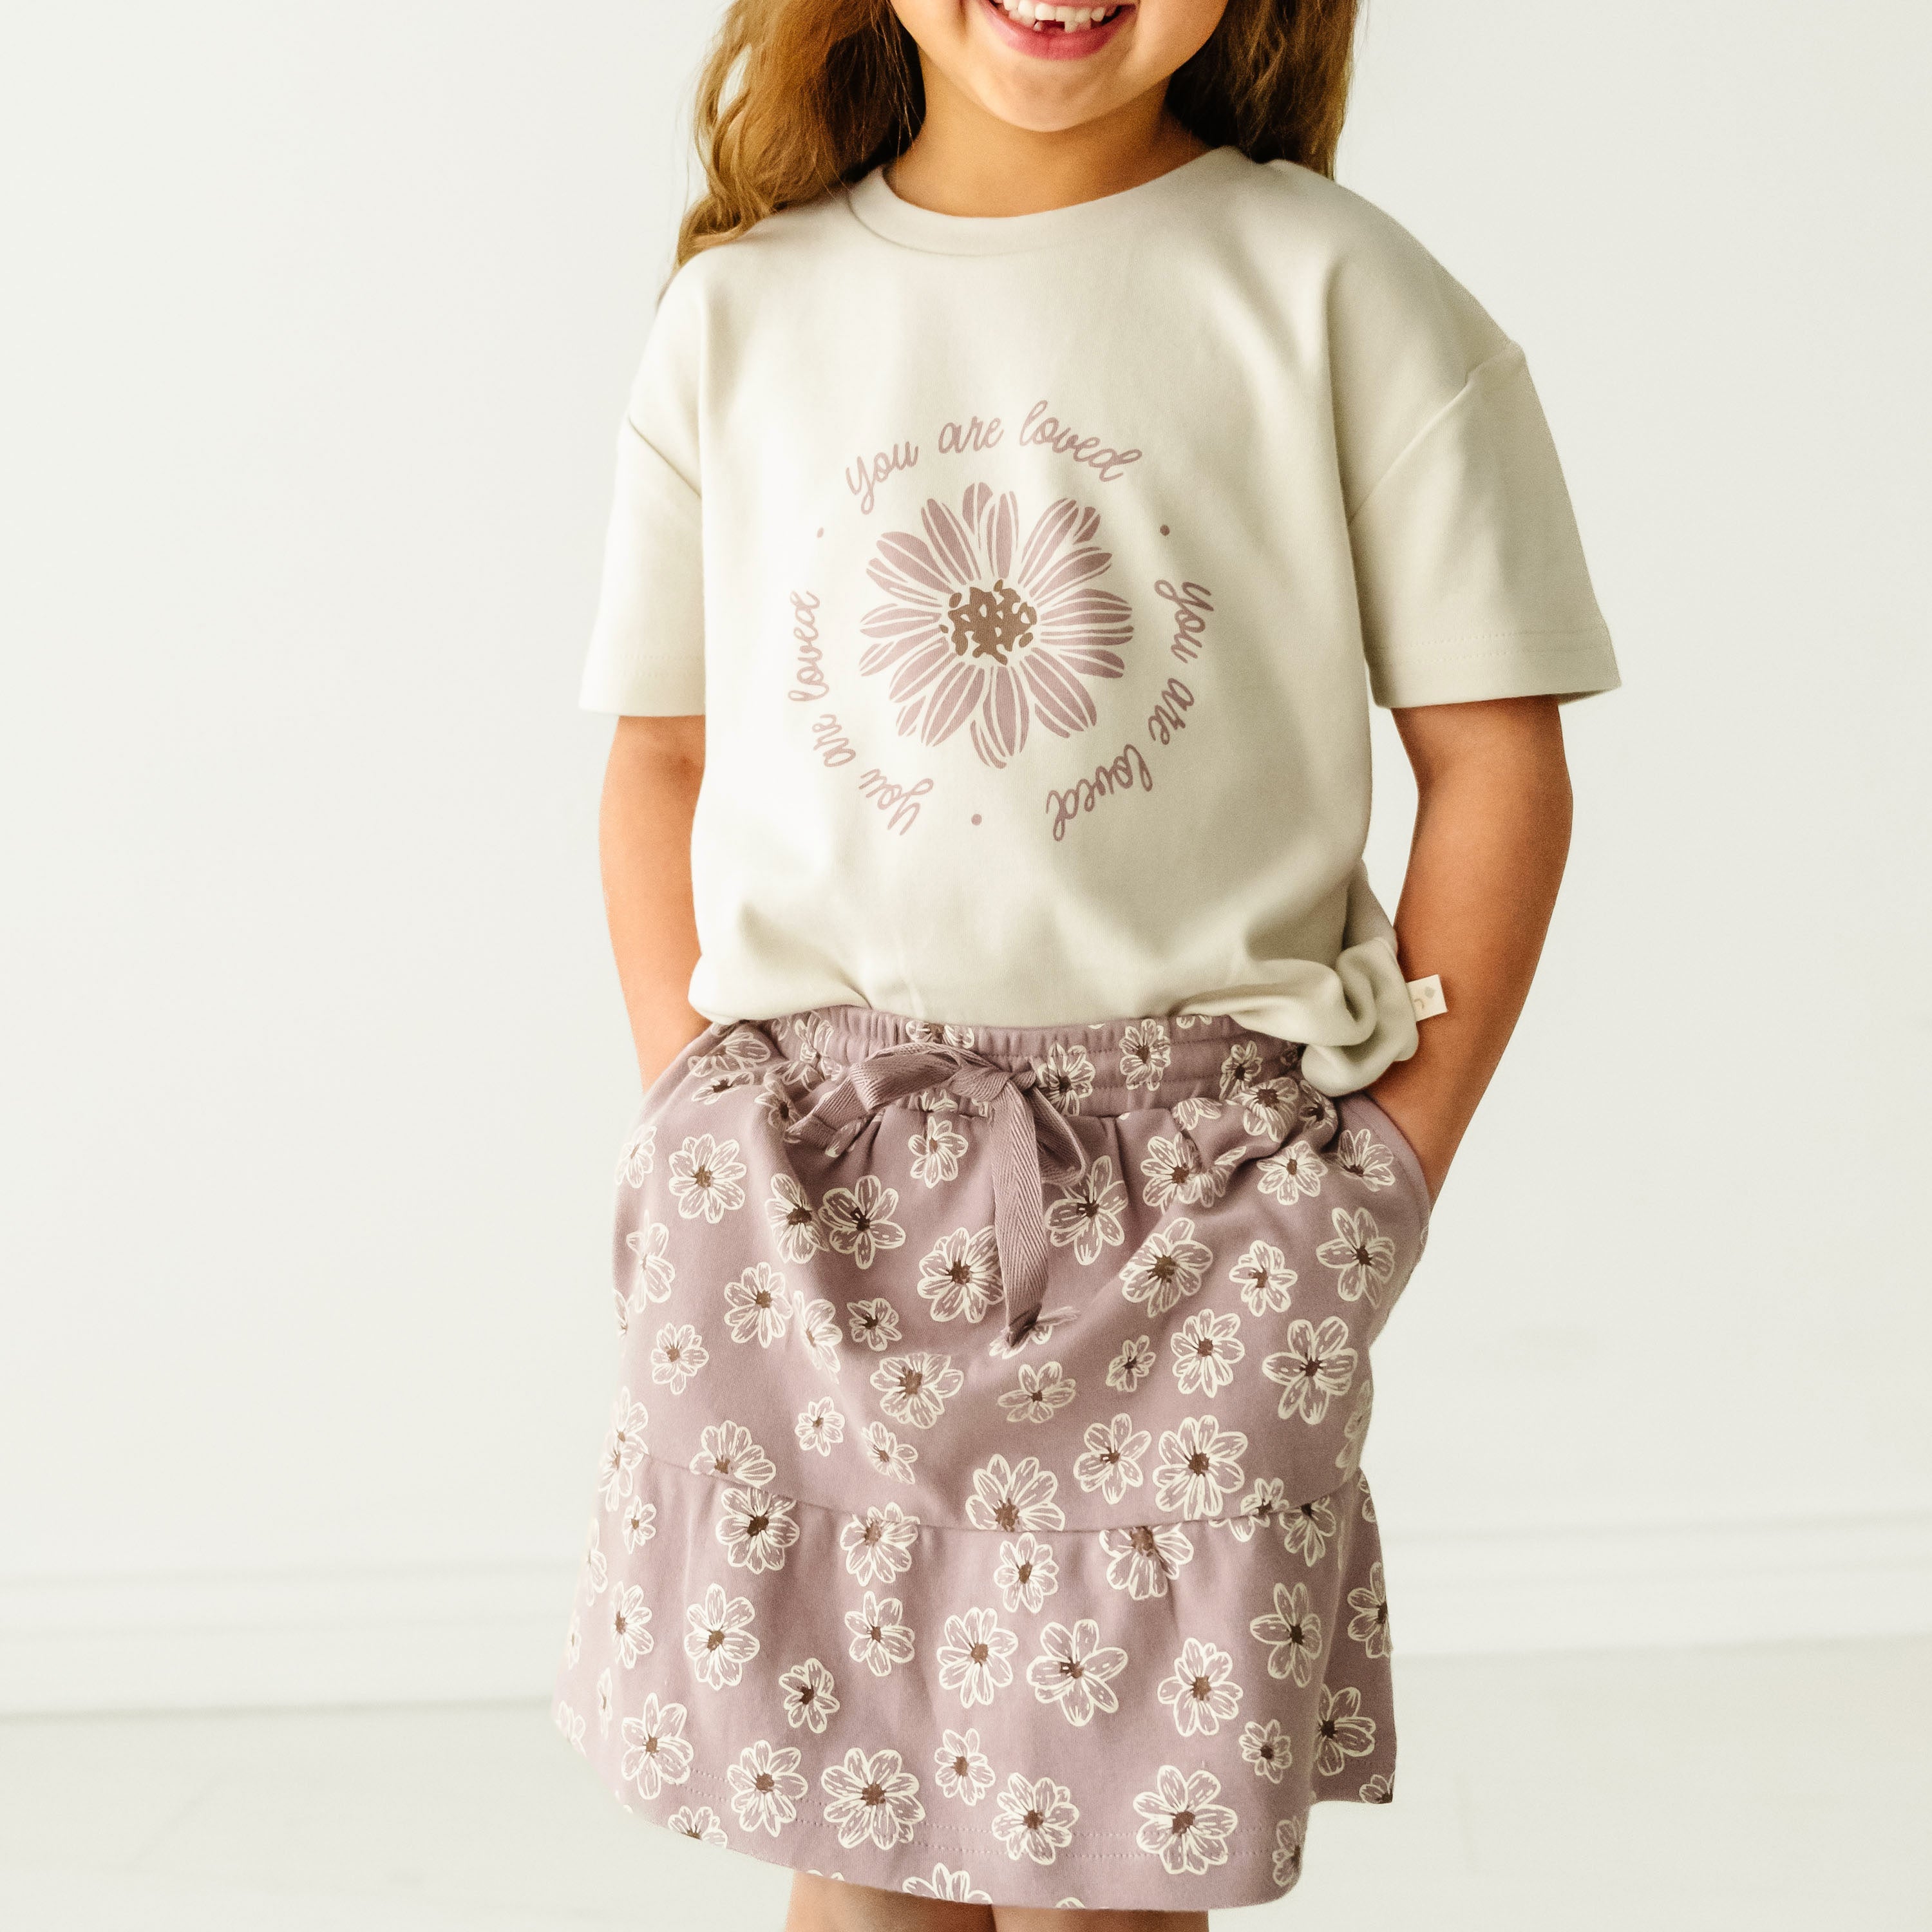 A young girl dressed in a Boxy Tee and Skort Set - Daisies from Organic Girls, standing against a plain background.